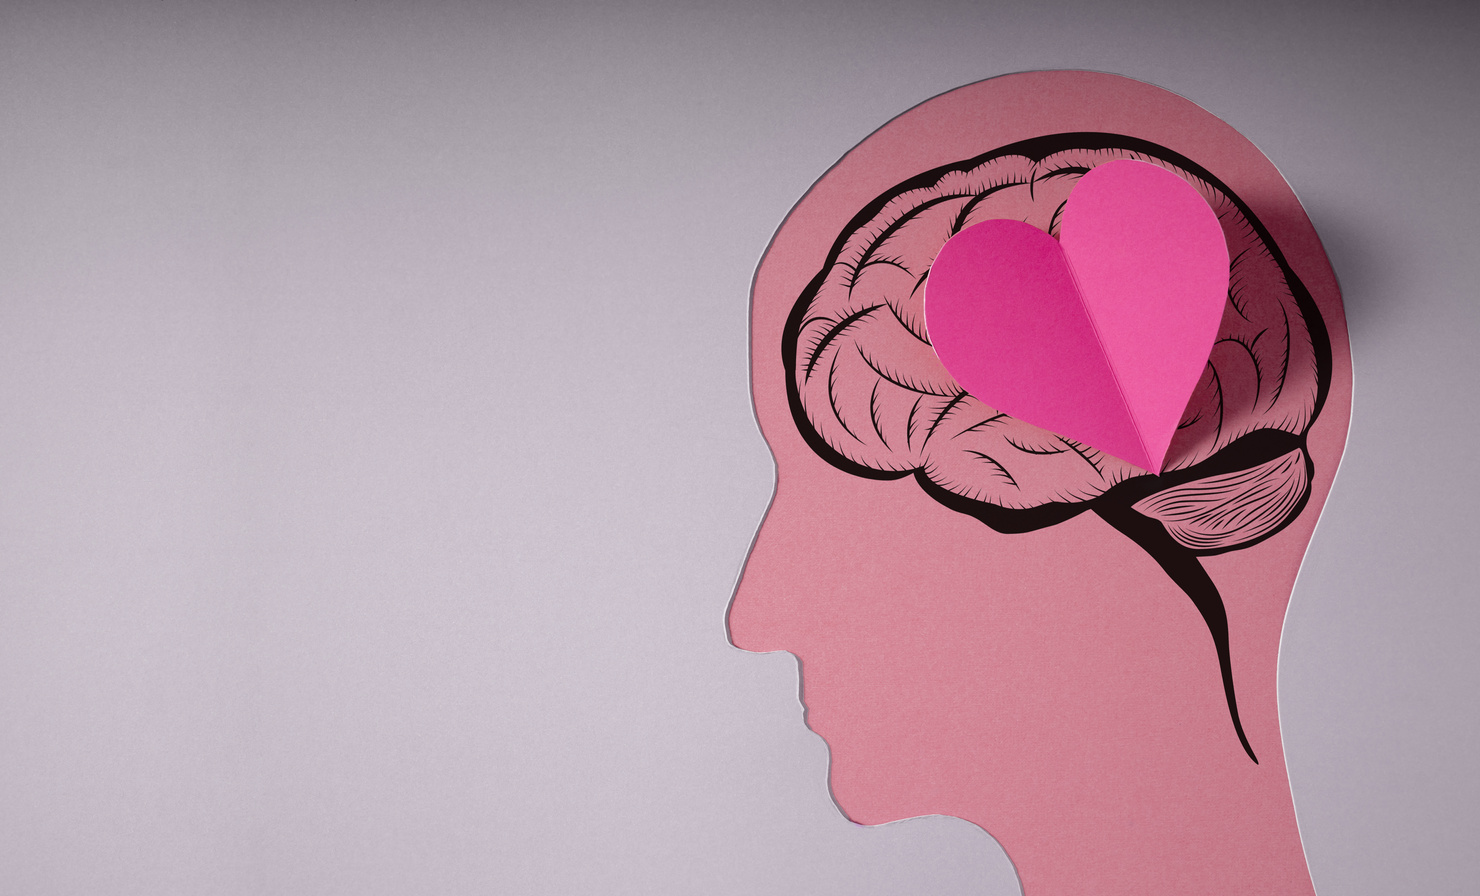  Paper Cut as Human Head with Pink Heart